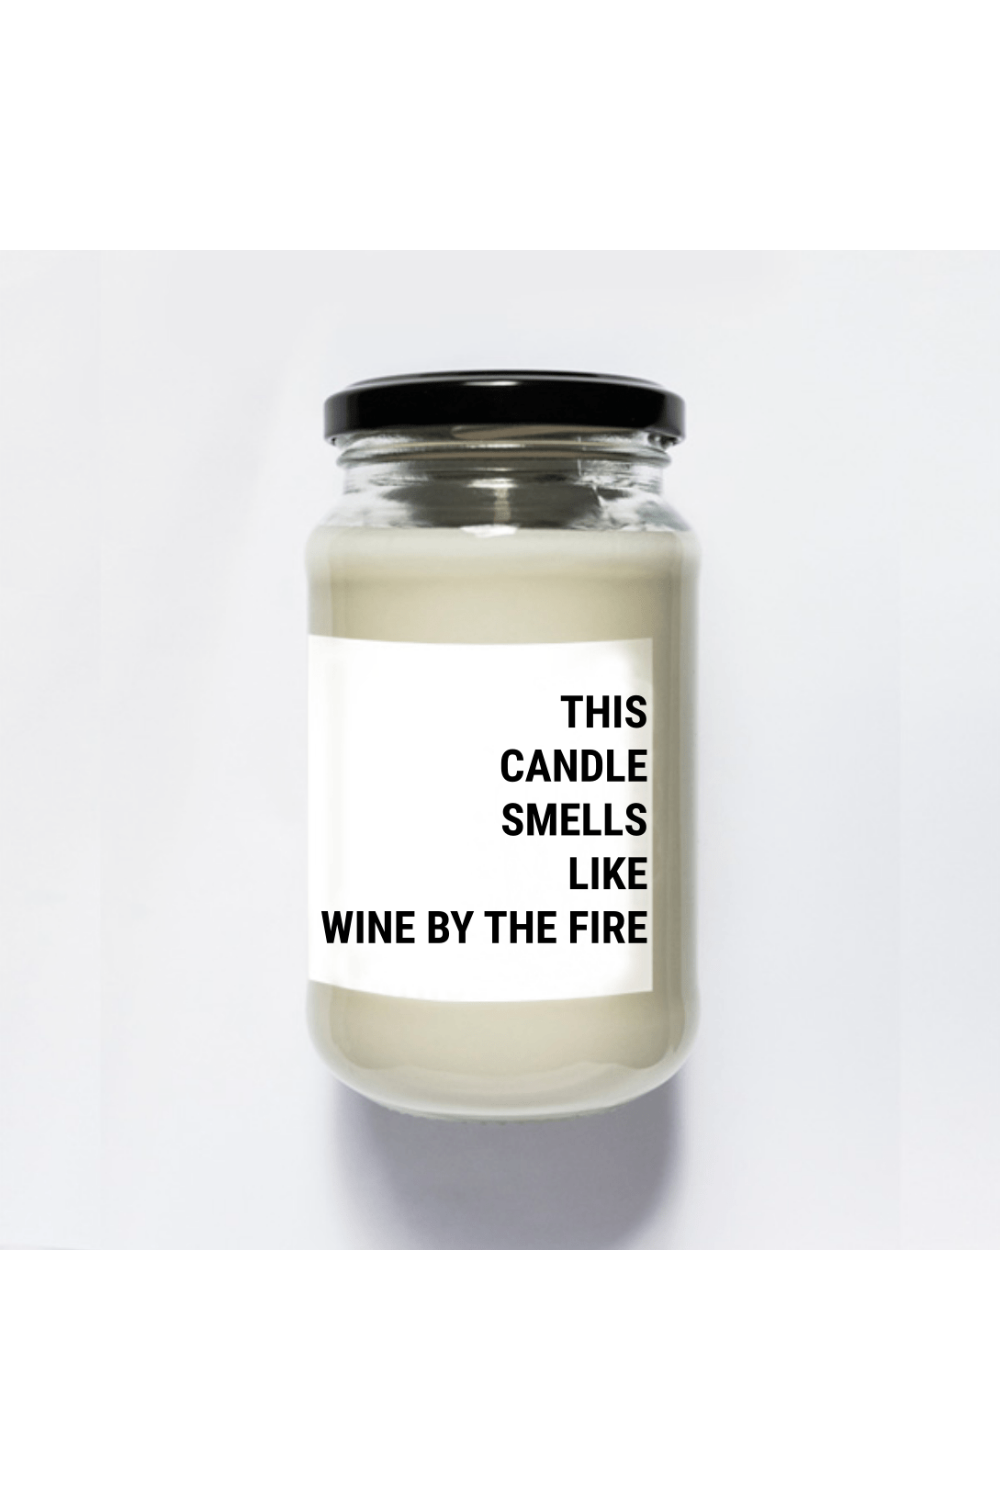 THIS CANDLE SMELLS LIKE... WINE BY THE FIRE